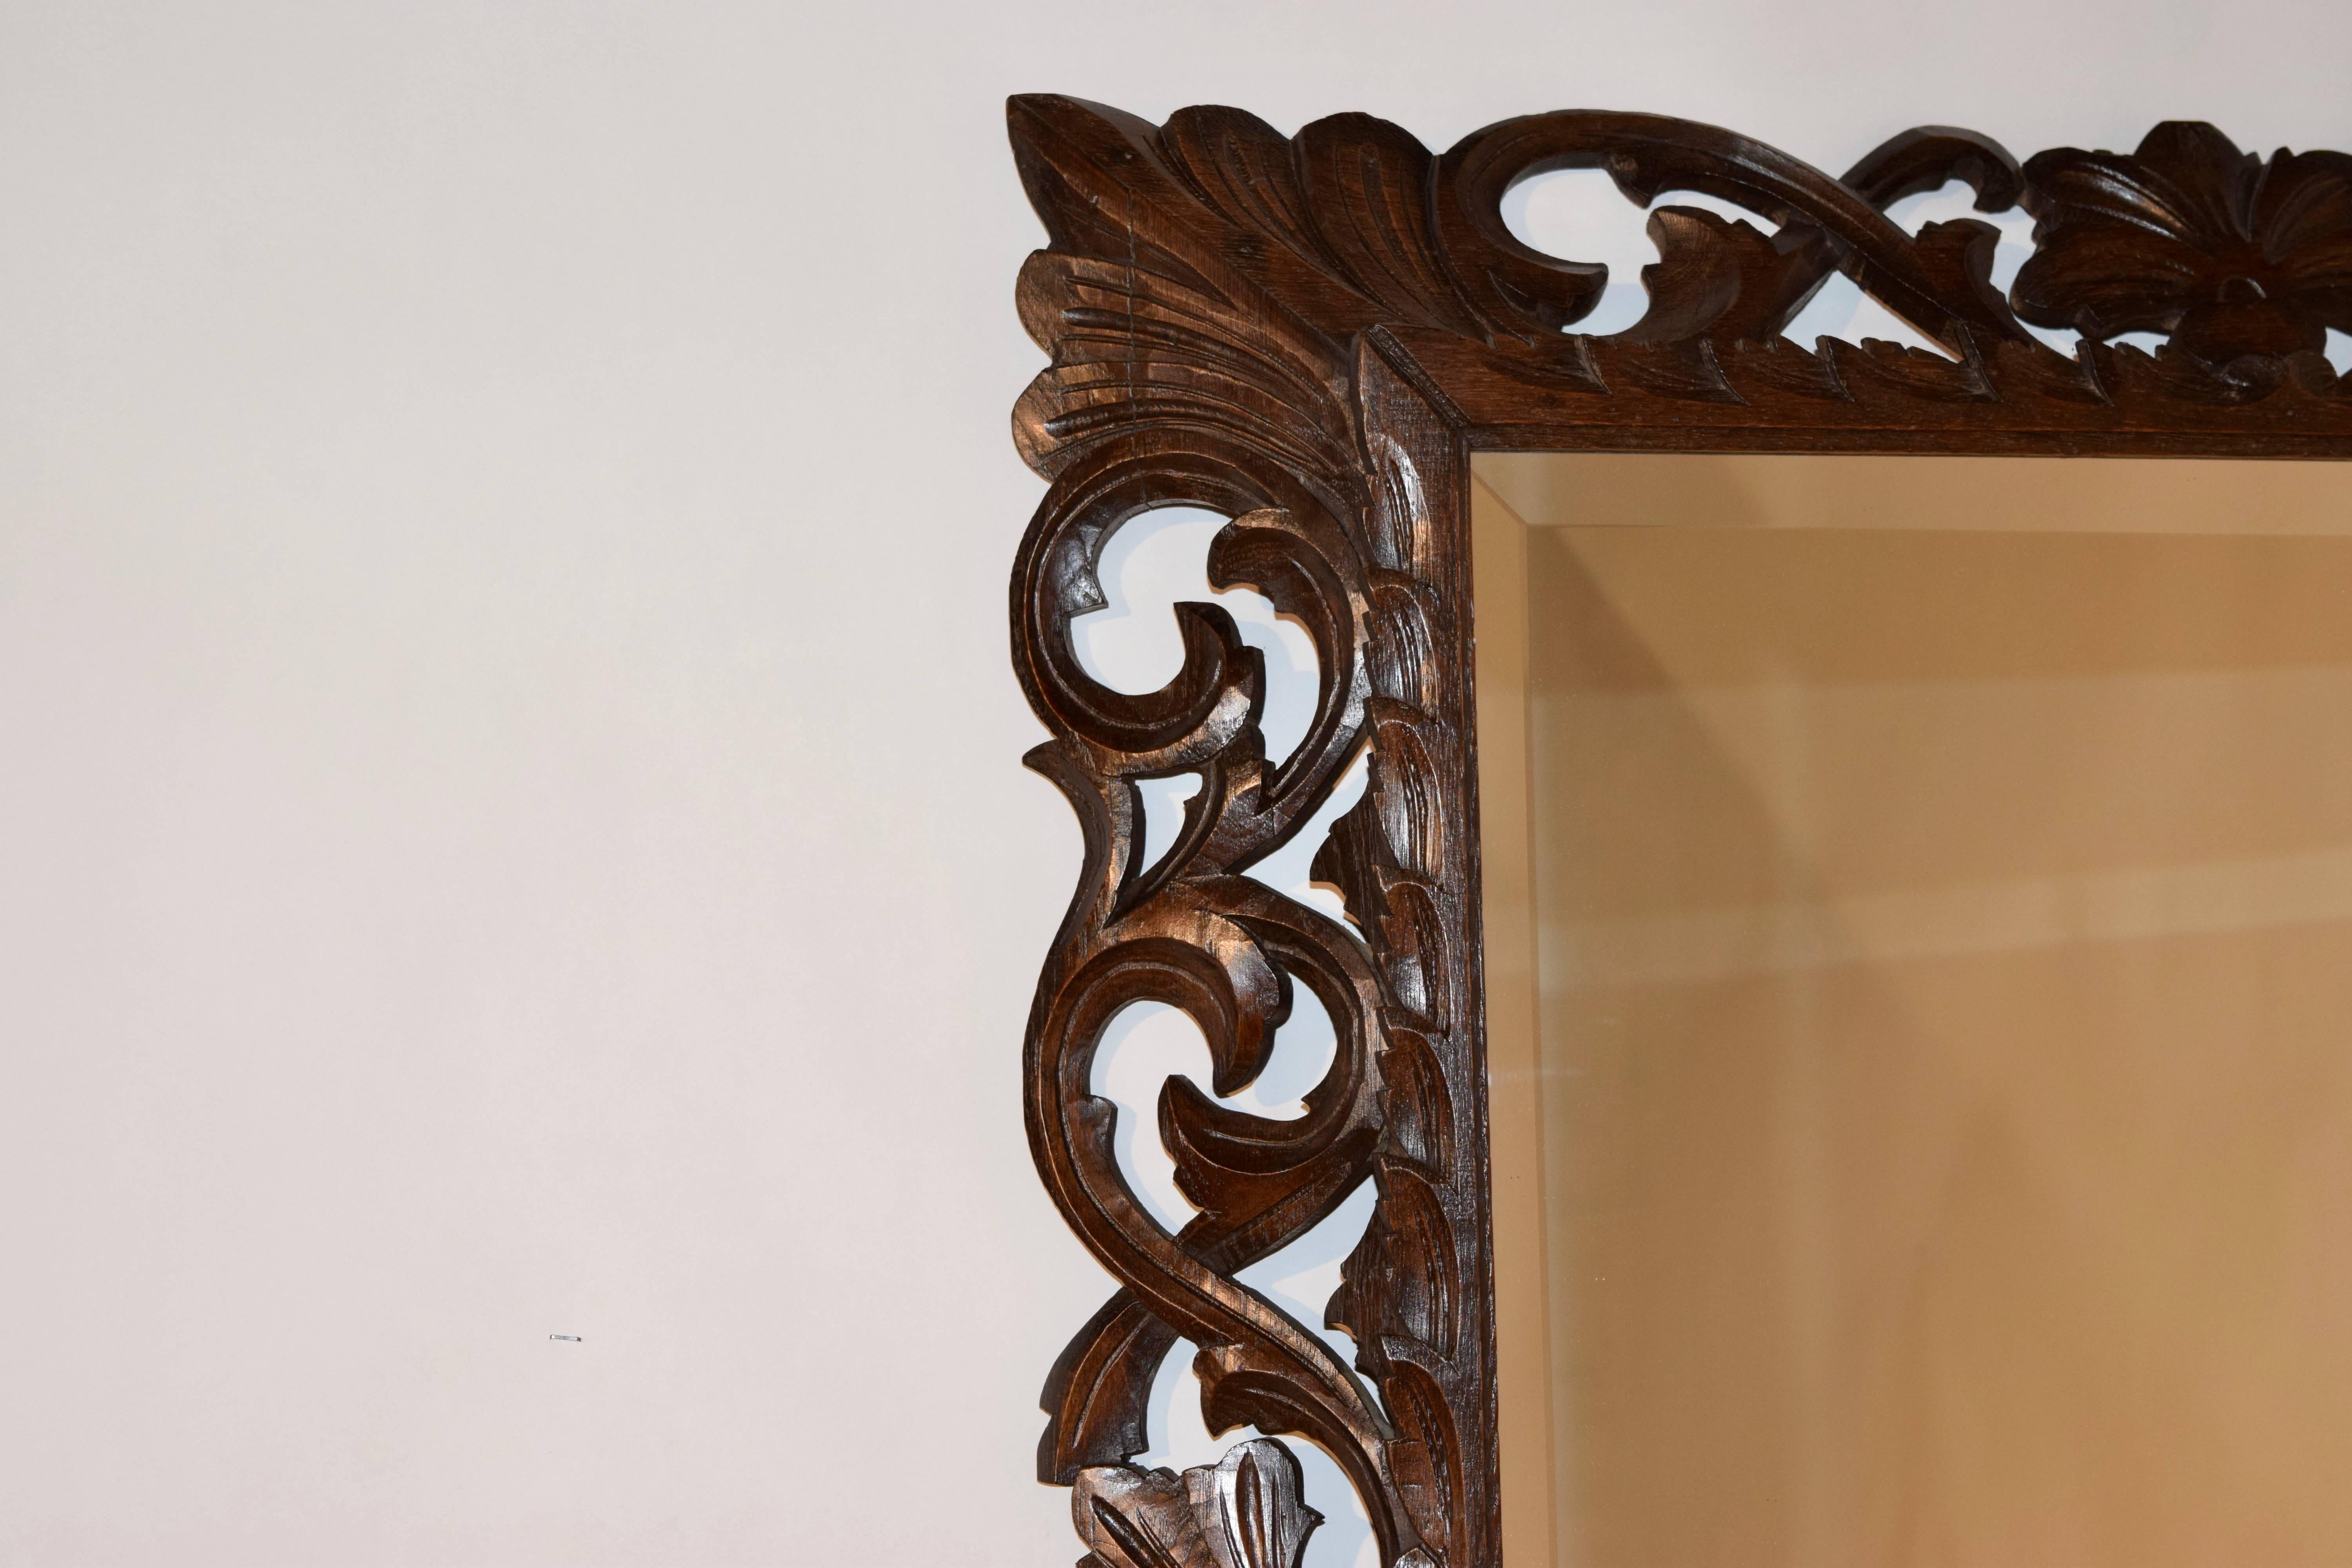 19th Century English oak hand-carved frame with leaves and scrolls surrounding a bevelled mirror.